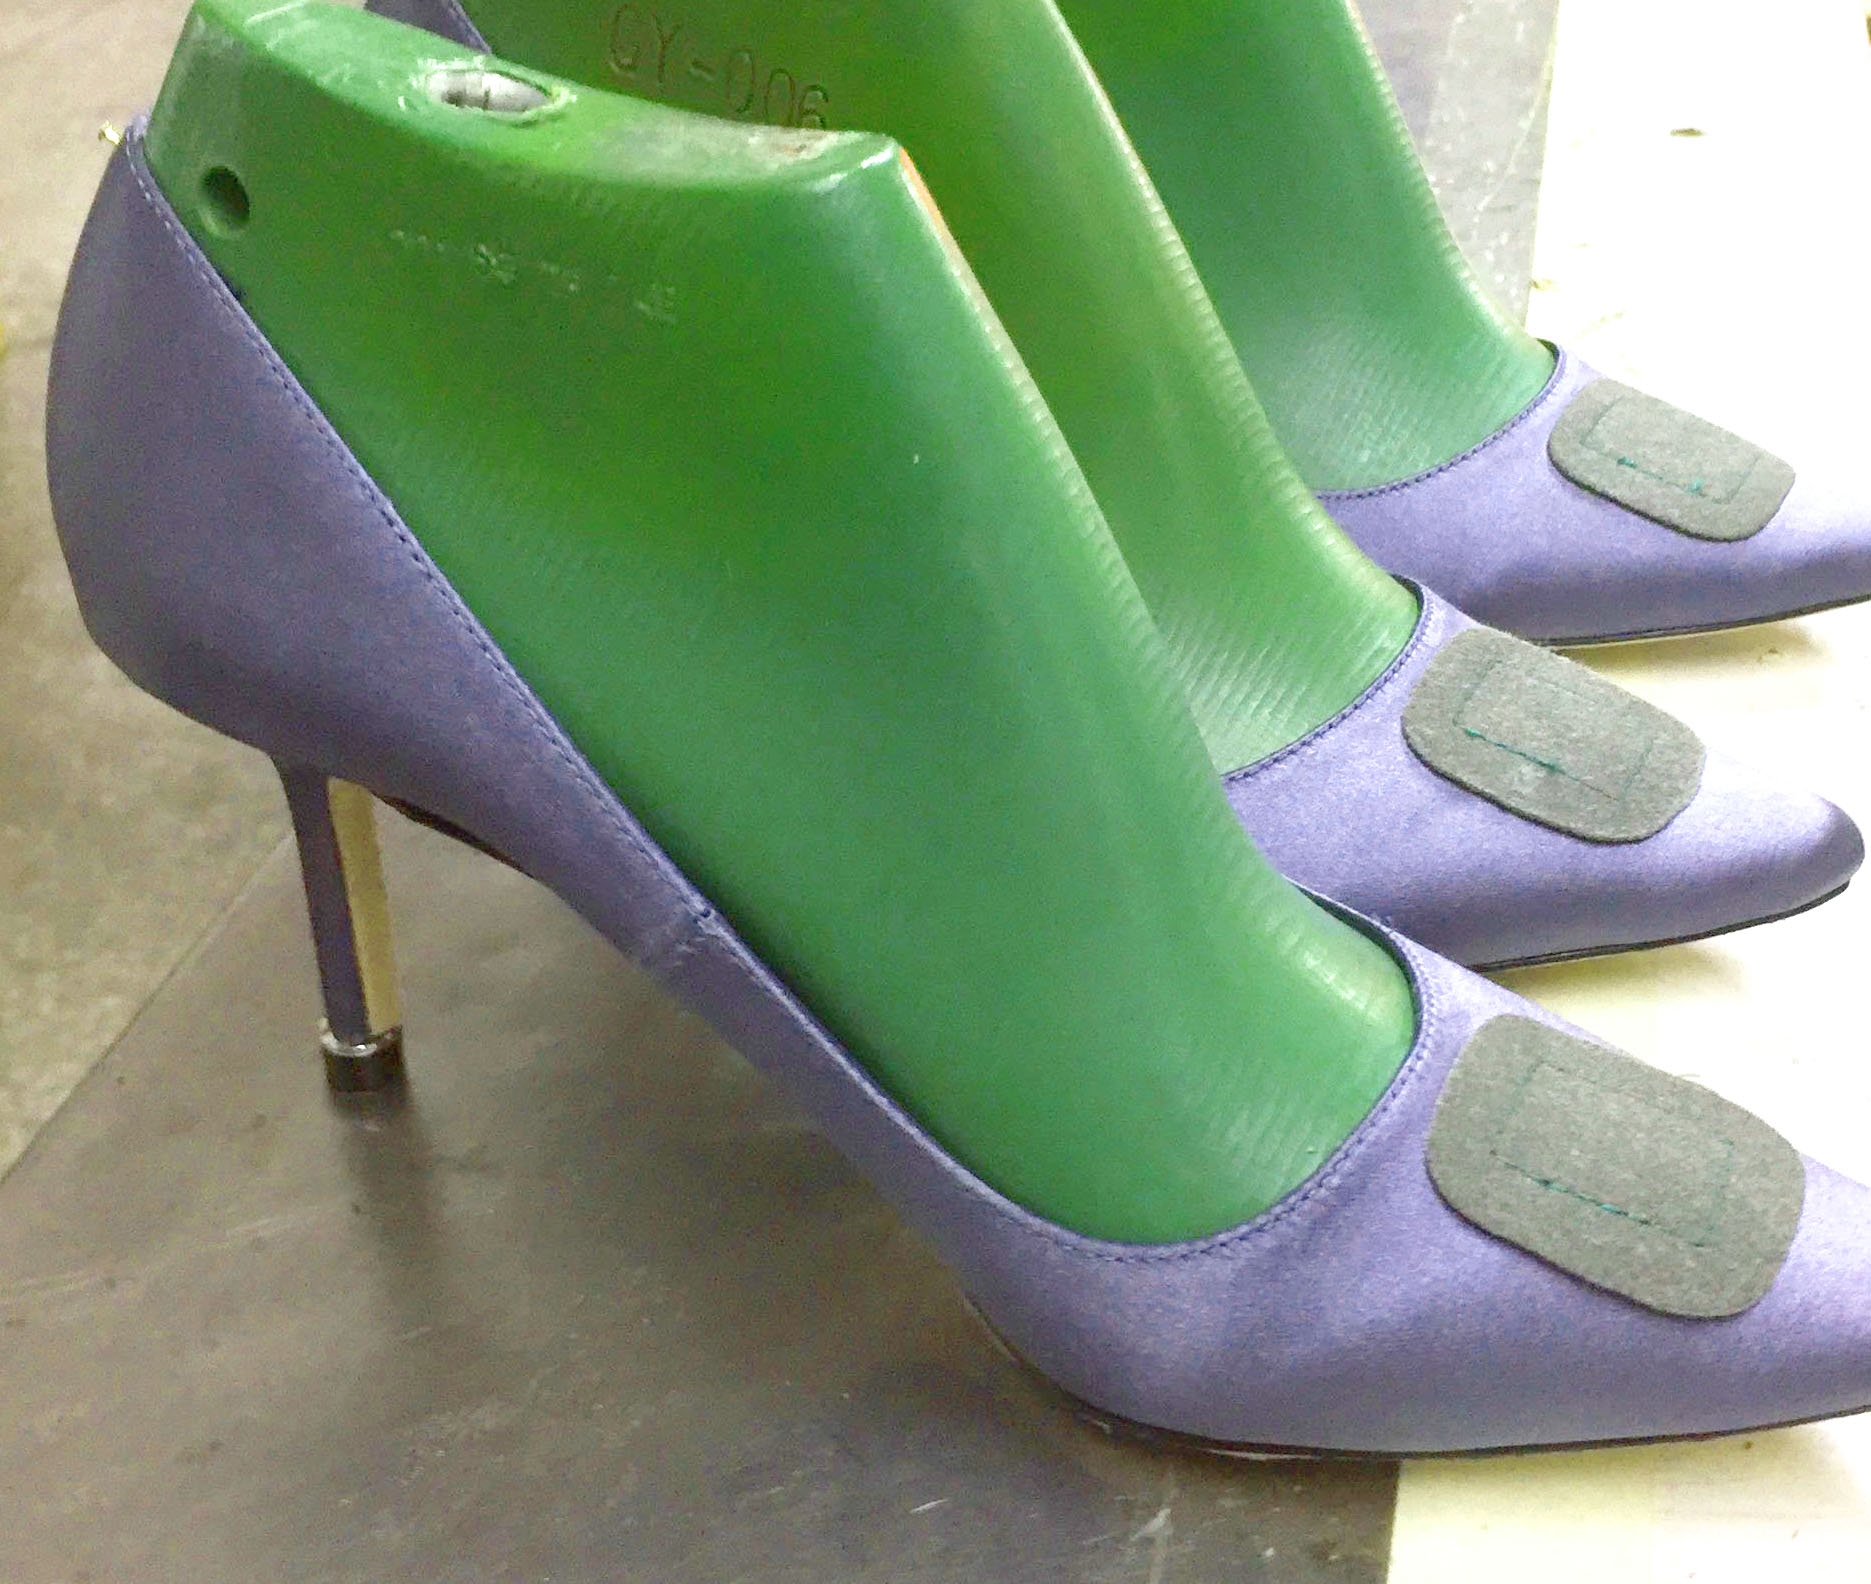 How Are High Heels Made?